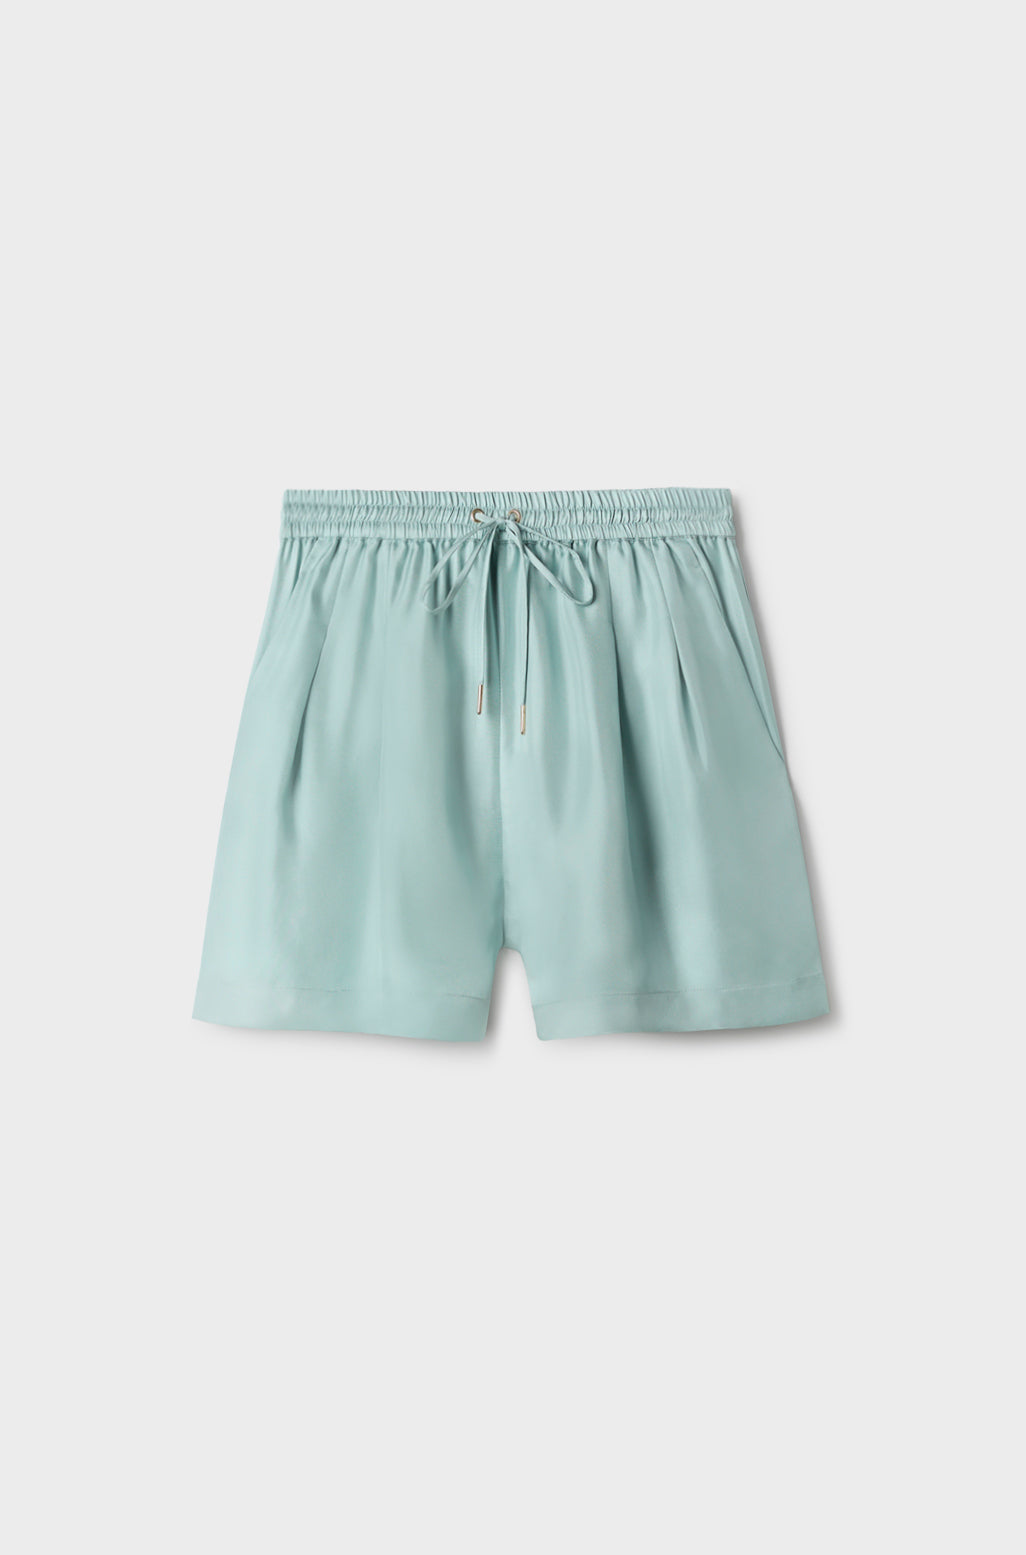 Twill Slouch Shorts in Mist